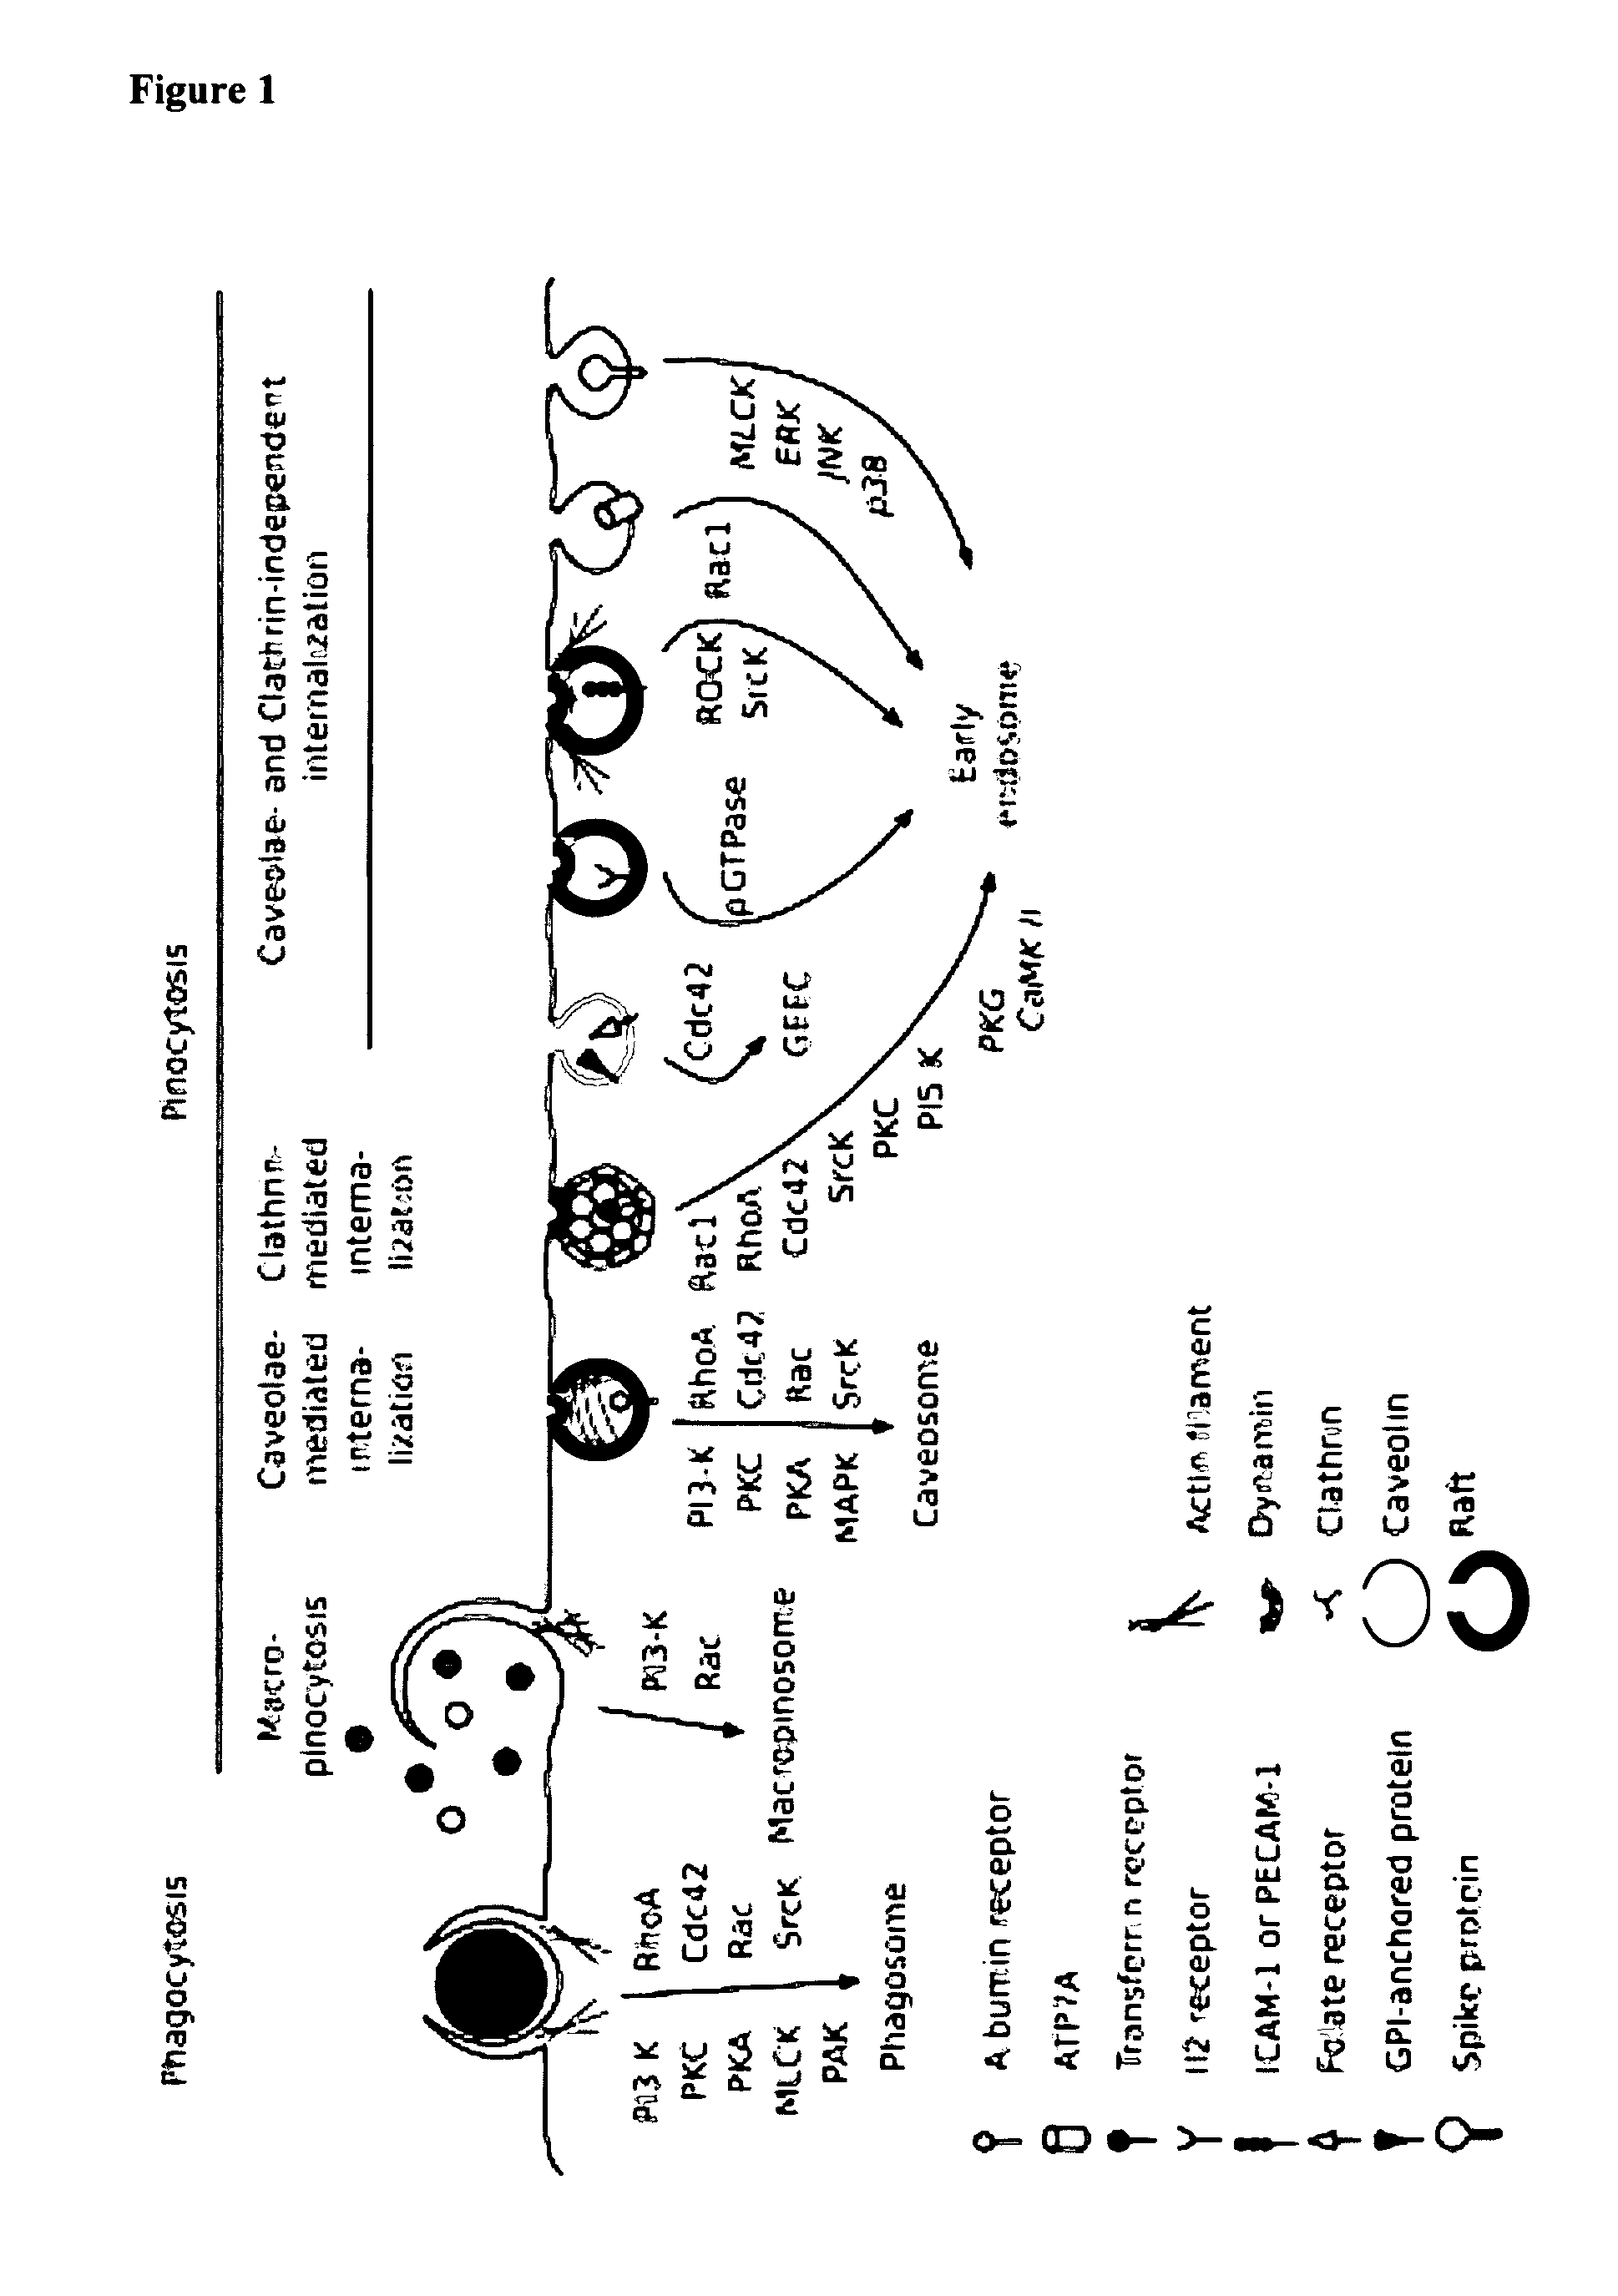 Methods for reducing the internalization of viruses and identification of compounds effective thereof